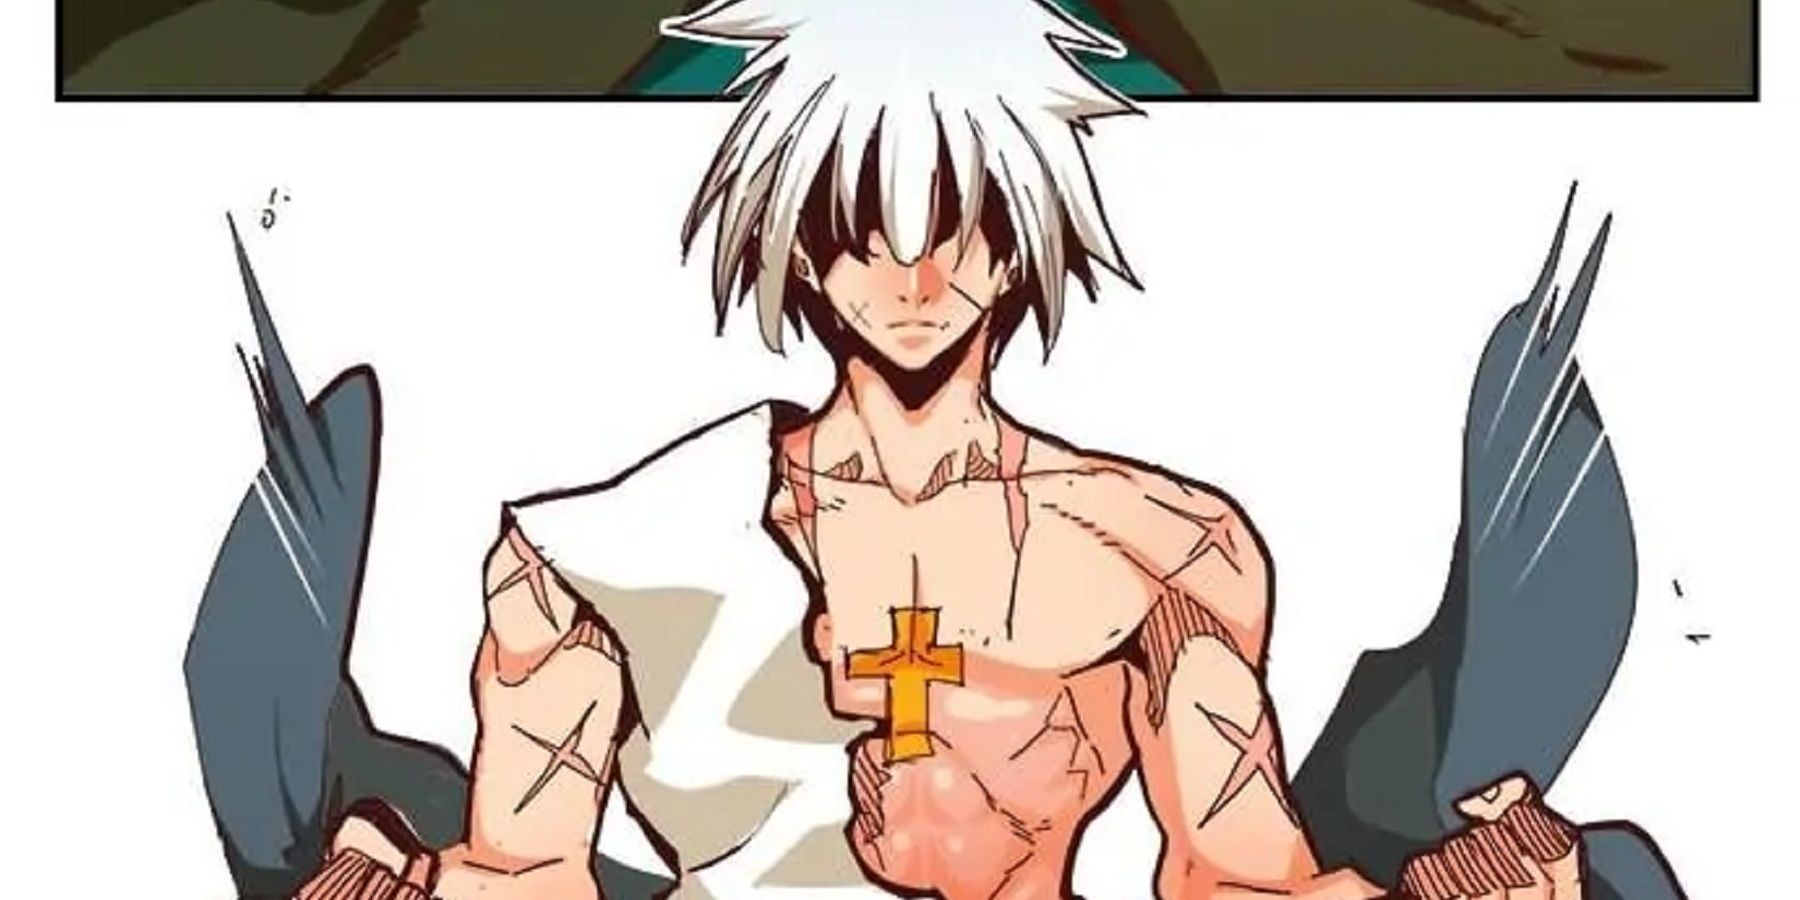 Mori in his final form in God of high School